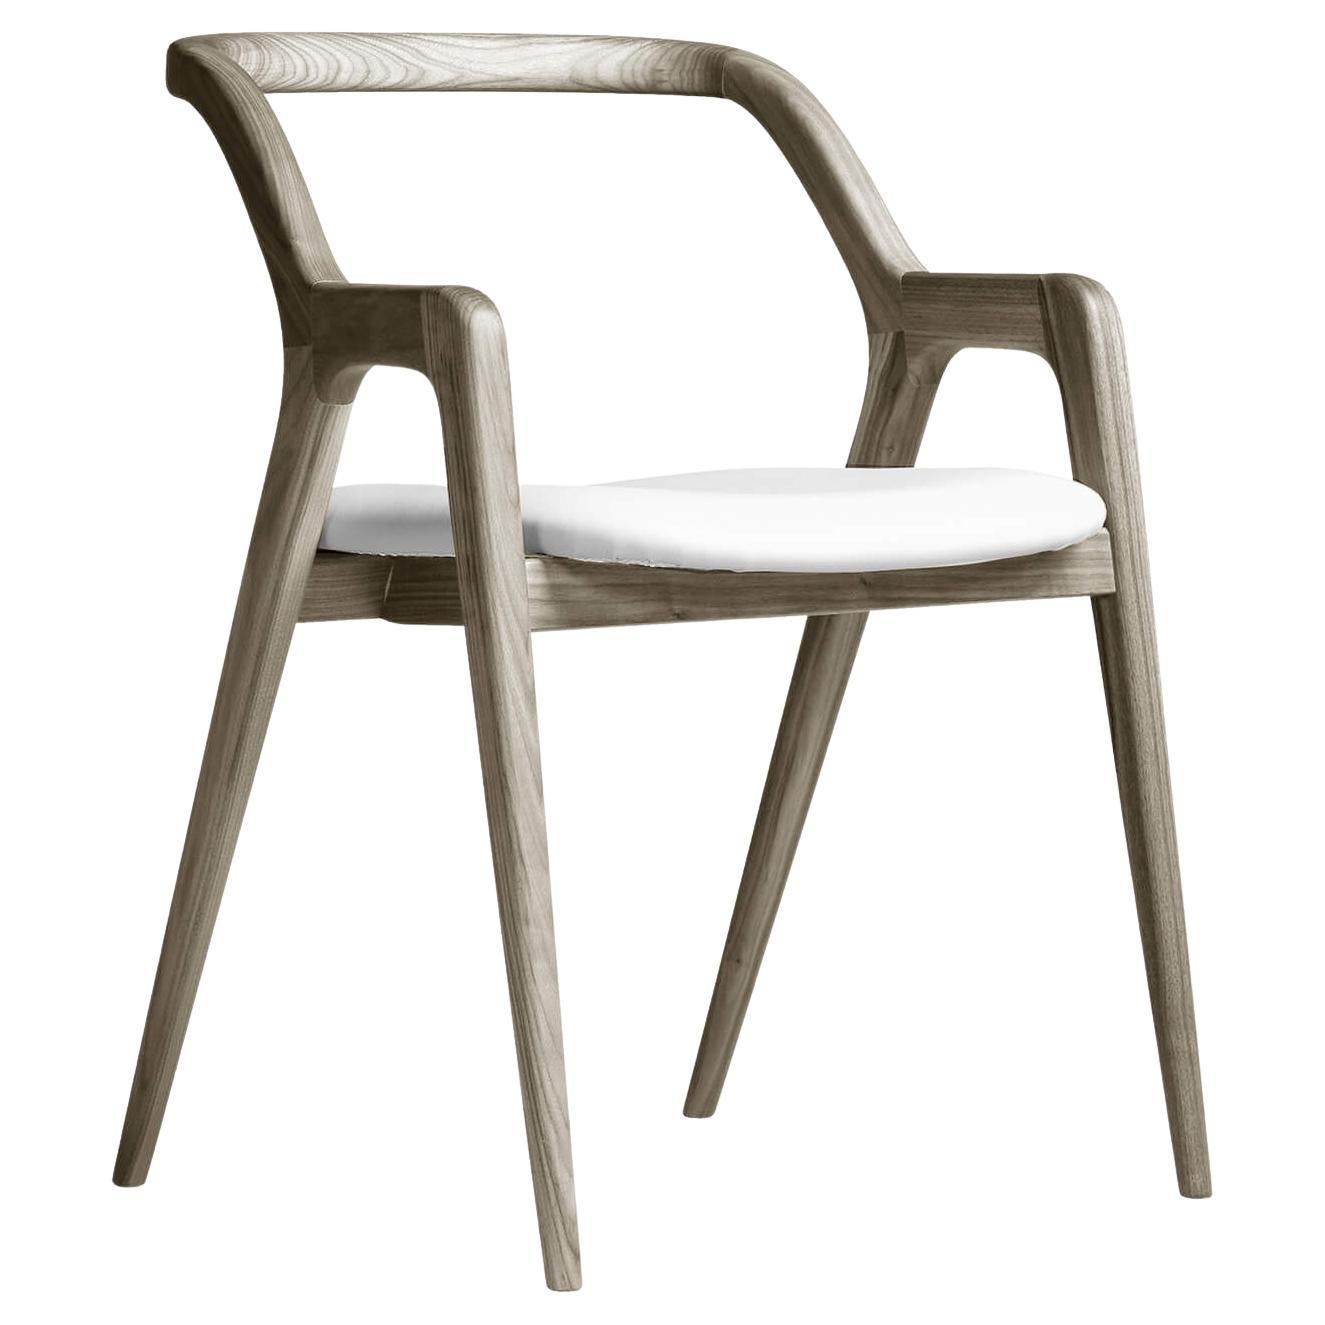 In breve Solid Wood Chair, Walnut in Hand-Made Natural Grey Finish, Contemporary